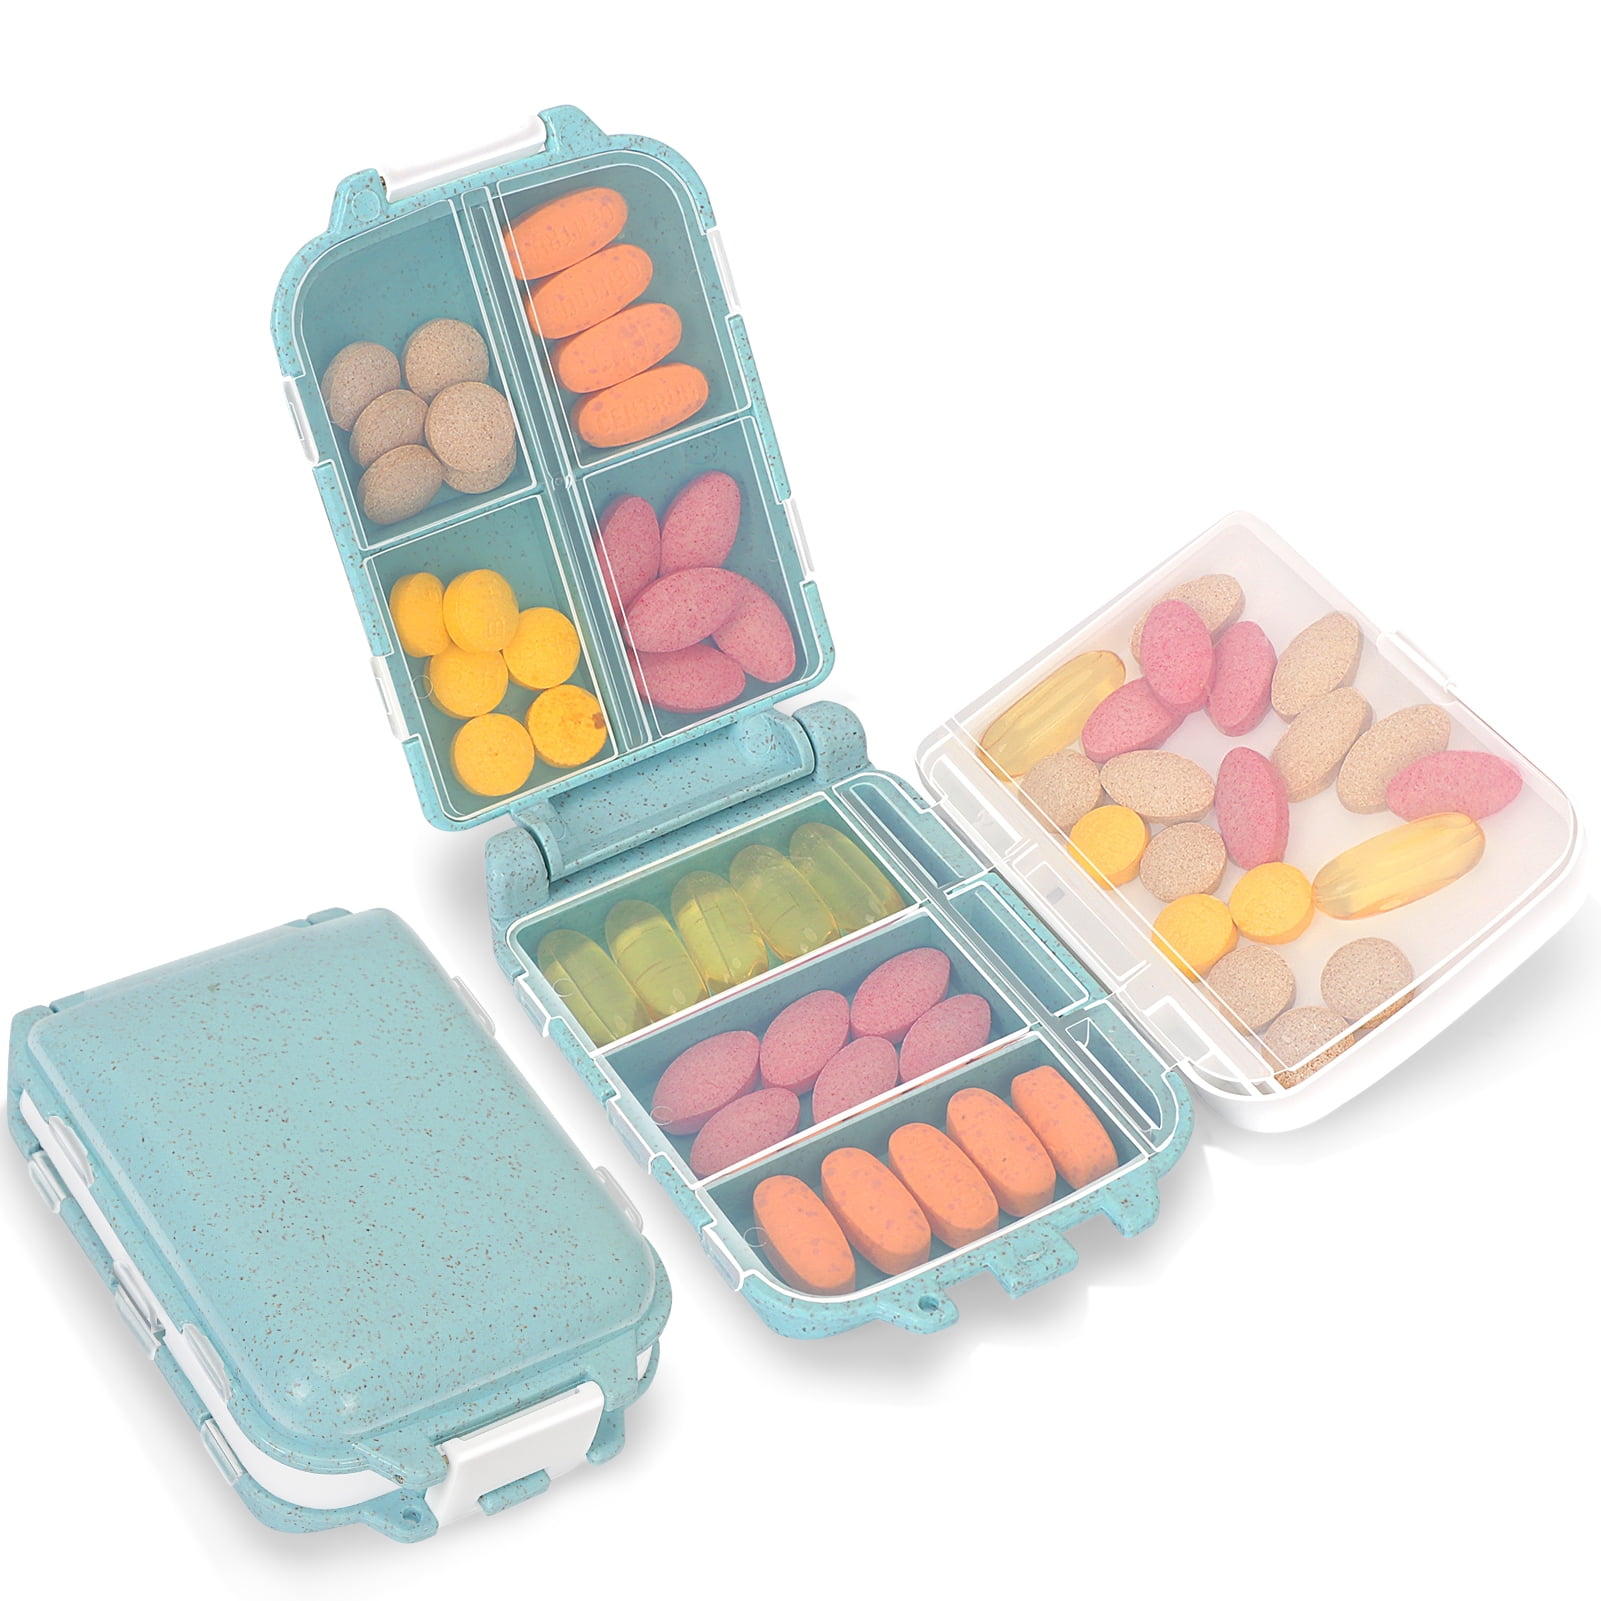 Skycase Pill Organizer, [2 Pack] Pill Cases, [Folding Design] Weekly Pill Case Organizer 7 Day, 8 Compartments Portable Travel Pill Box for Pocket